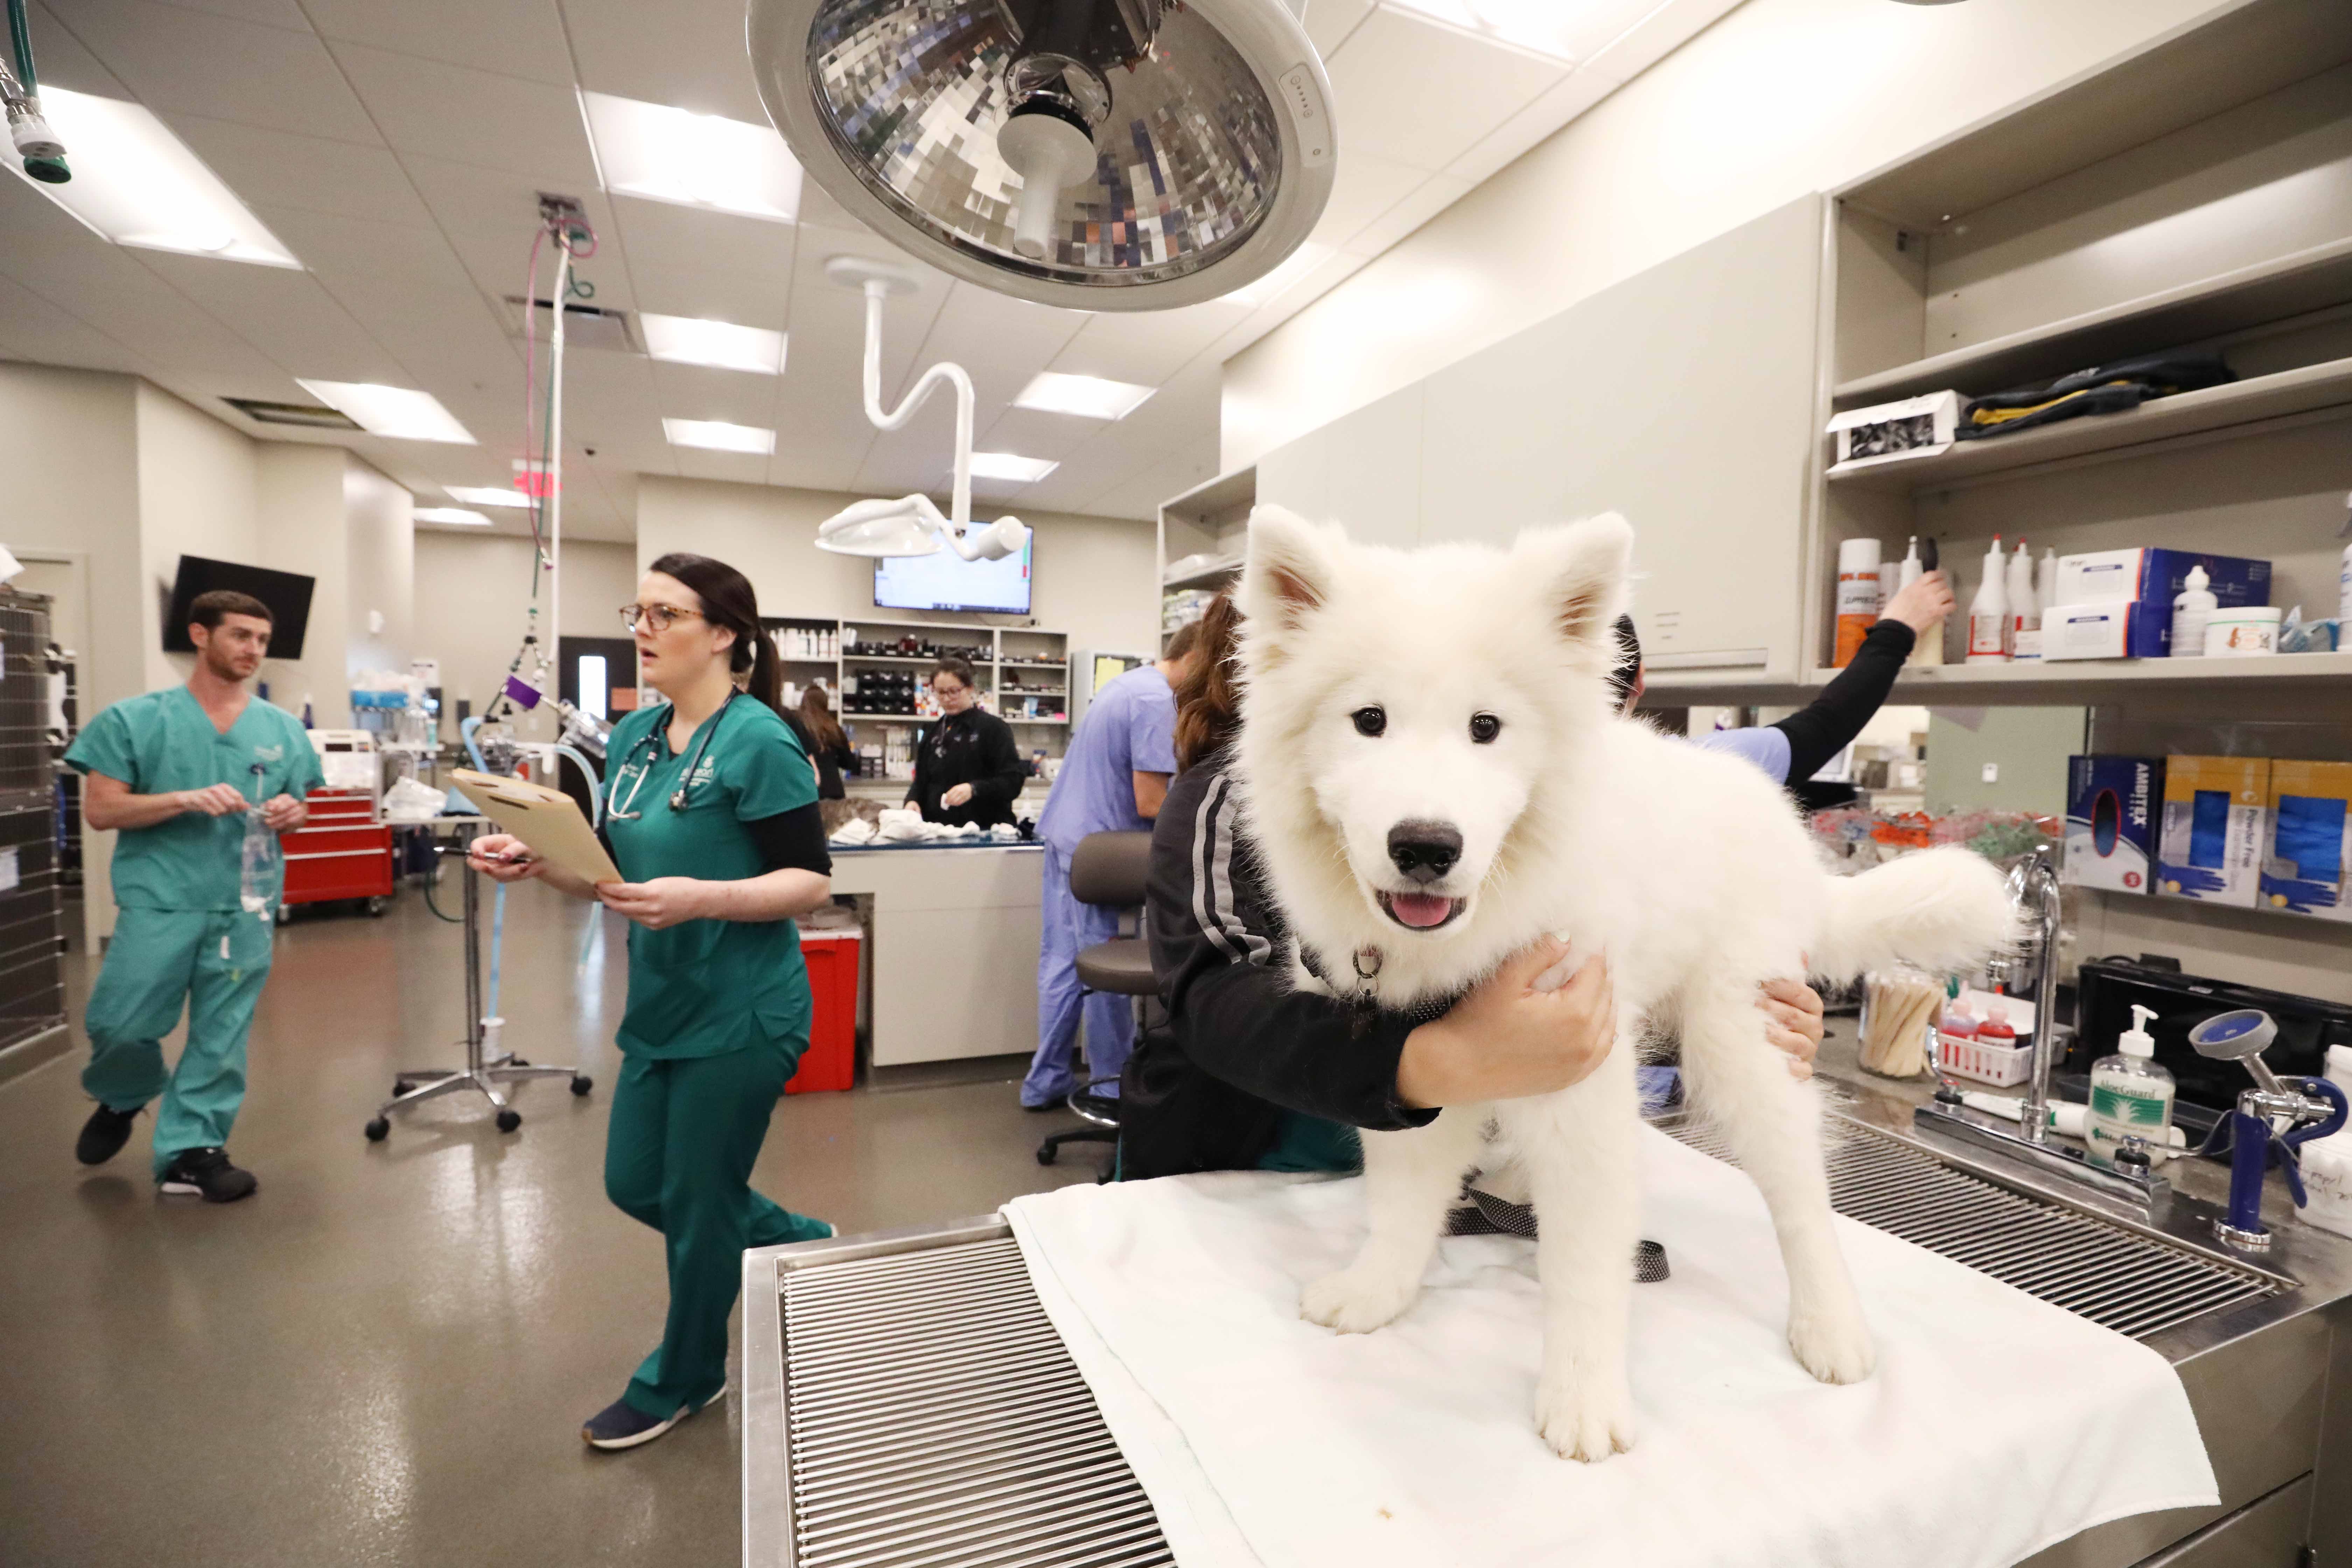 A white Akita puppy is positioned on a table while vets are in the background.